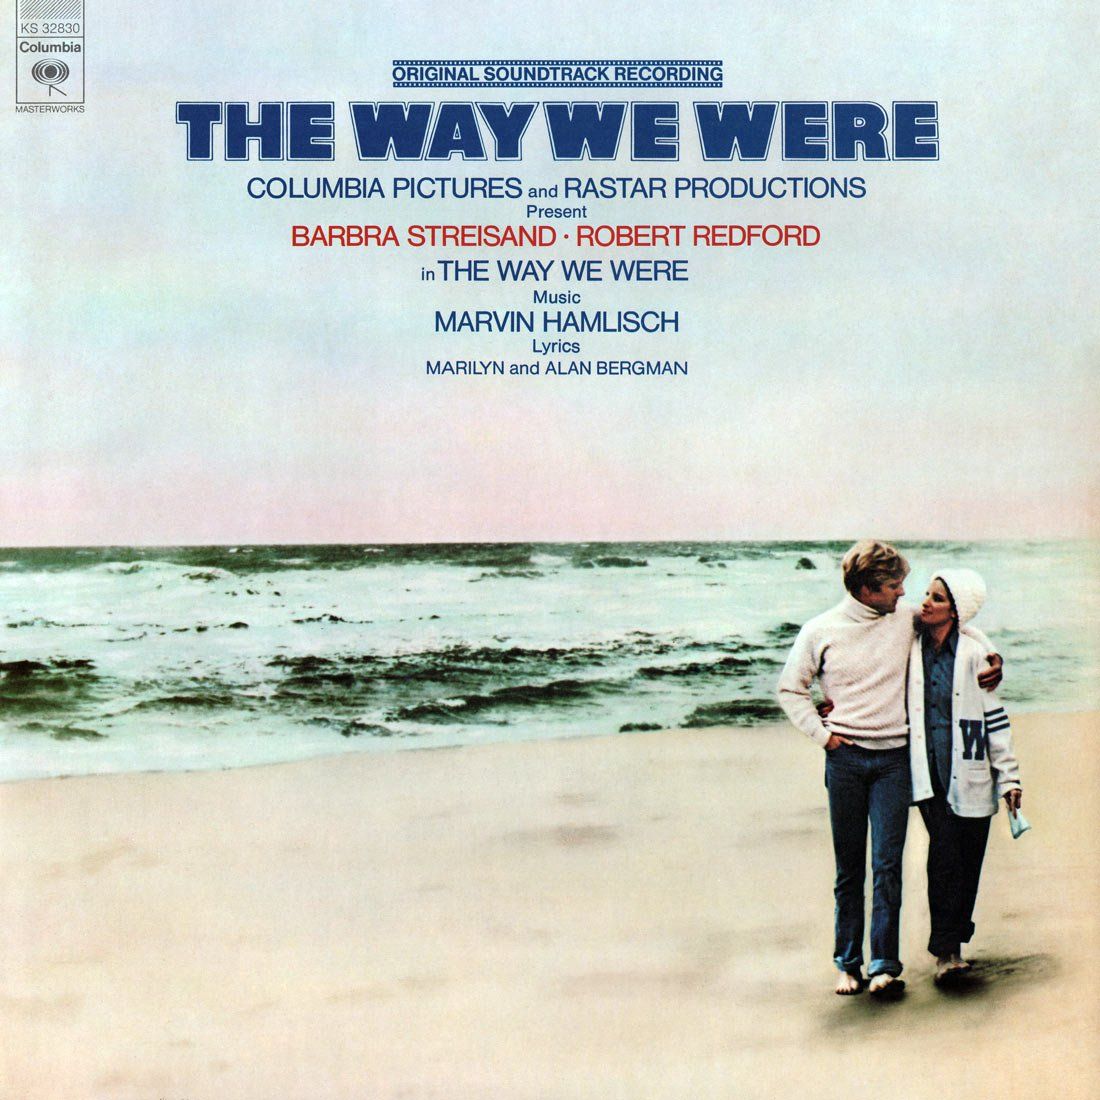 The Way We Were original soundtrack album cover. Scan by Kevin Schlenker.